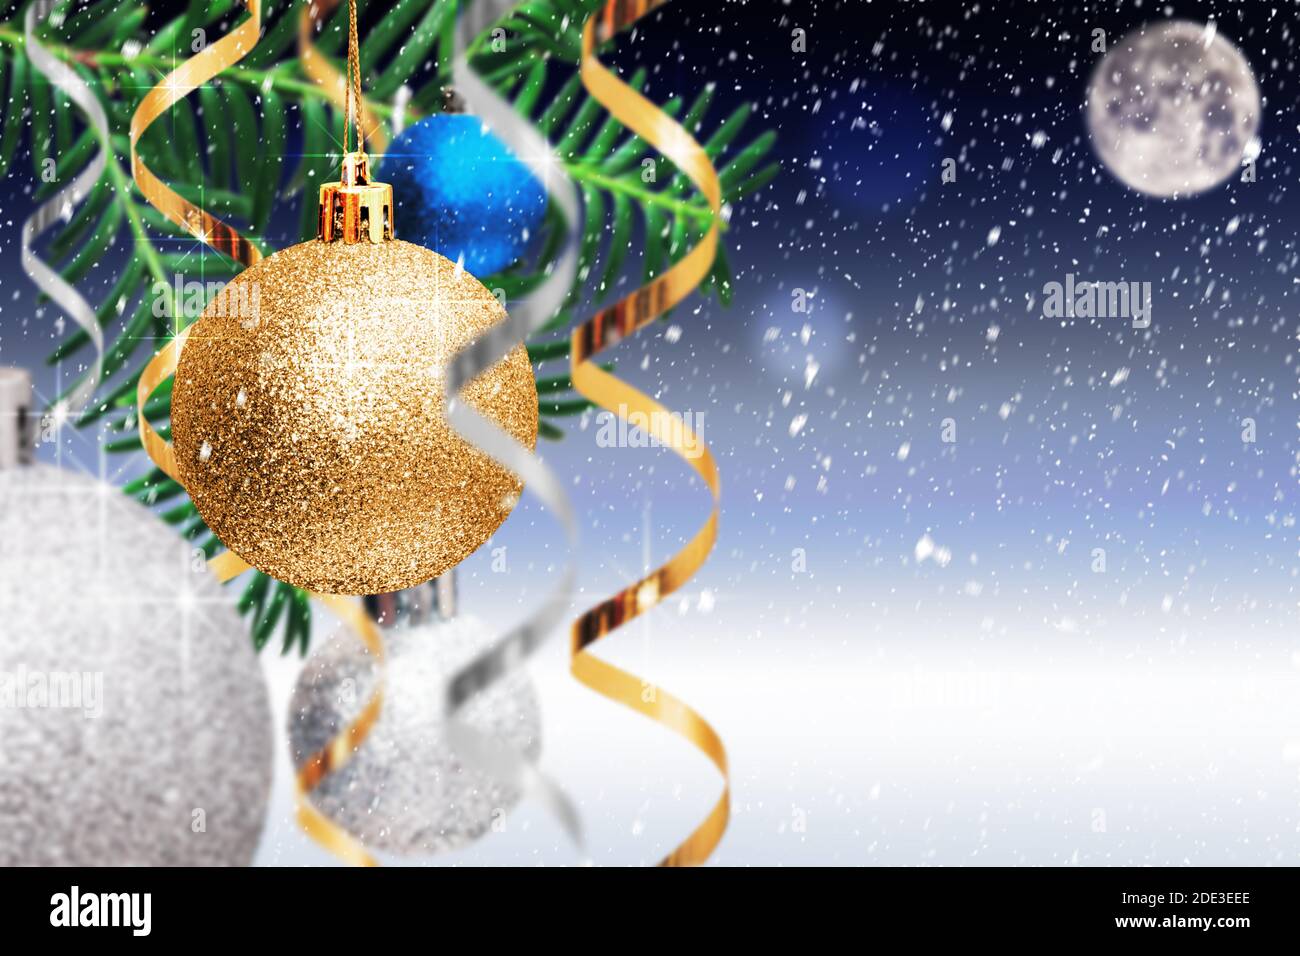 Christmas decoration. Golden and silver balls, streamers hanging on spruce branch on blue snowy background. Christmas card with copy space Stock Photo